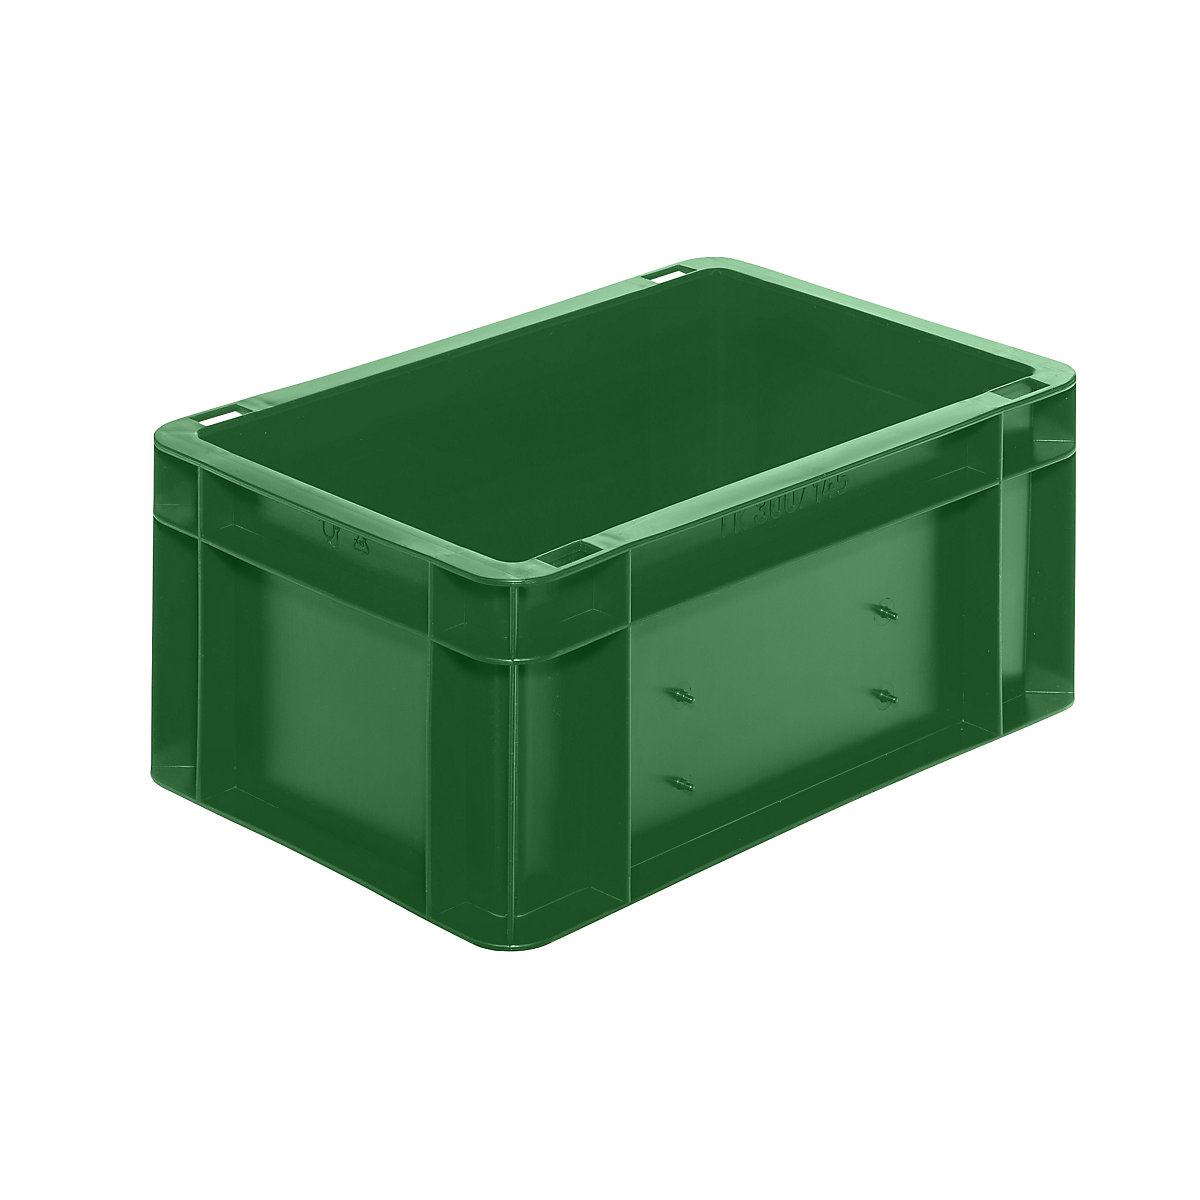 Euro stacking container, closed walls and base, LxWxH 300 x 200 x 145 mm, green, pack of 5